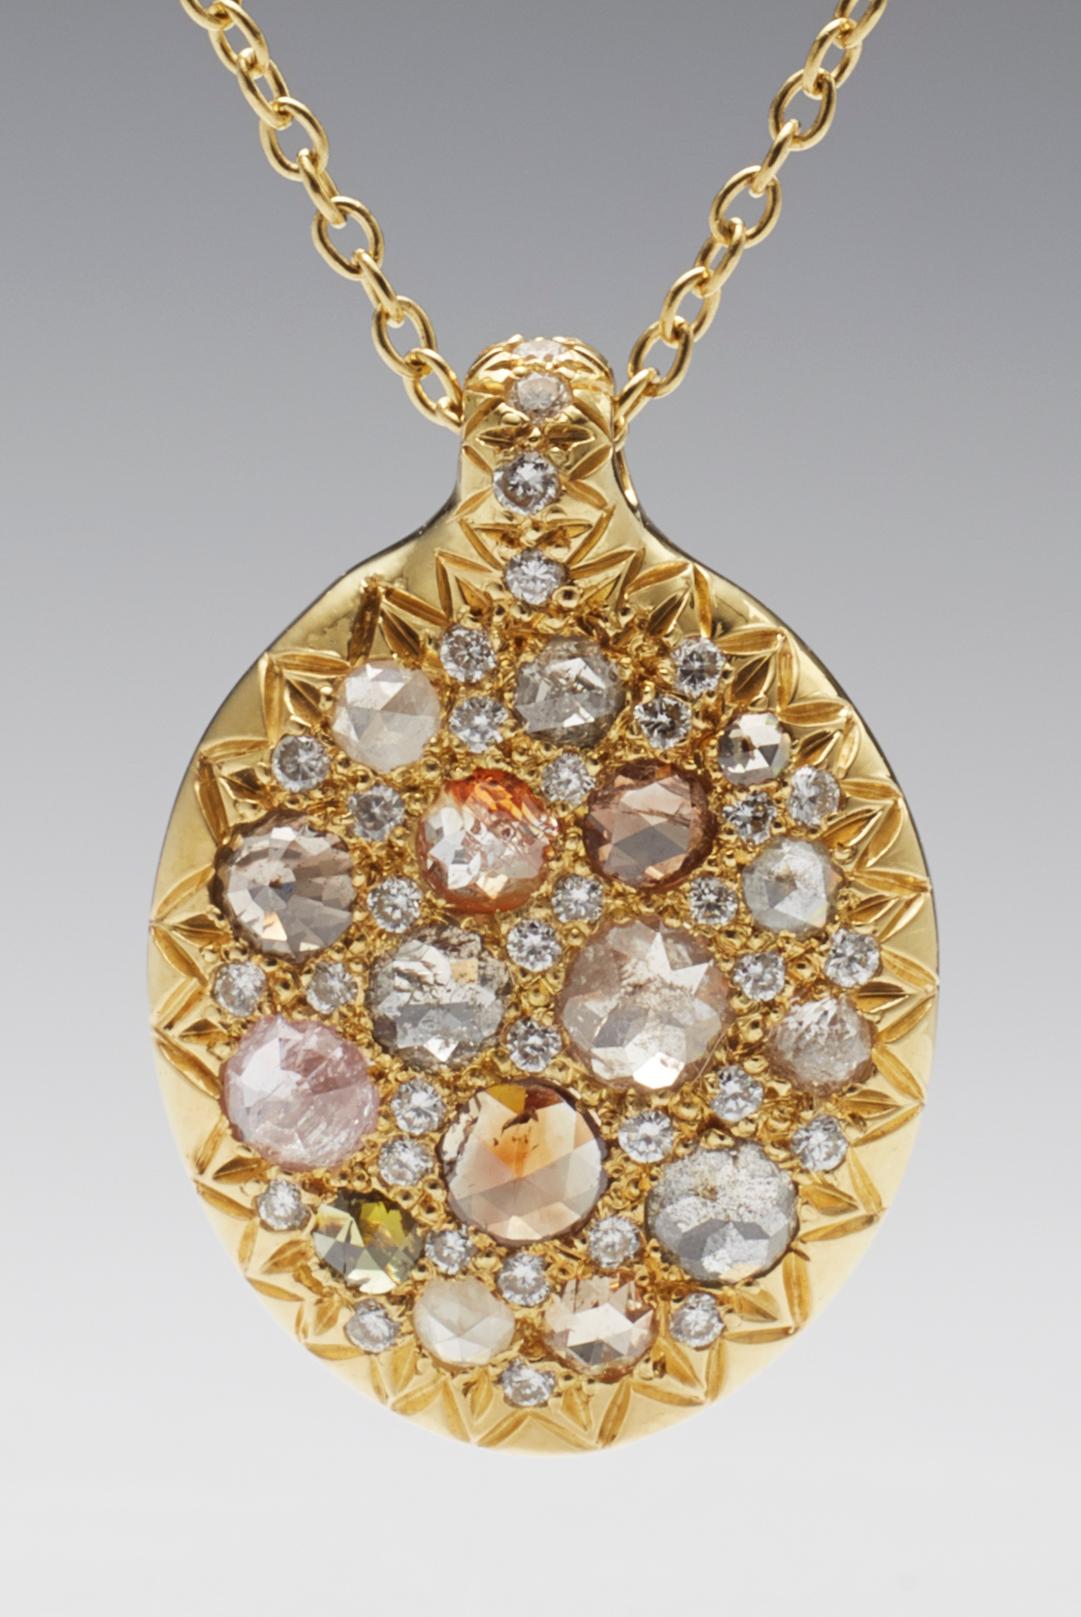 Rose cut natural multi color pave diamond pendant. One of a kind, hand crafted by jeweler Christopher Phelan. 48 VS diamonds total weight 1.17 carats. 18K Gold.
Pendant diameter .75 x .50 inches. Length of necklace 16 inches.